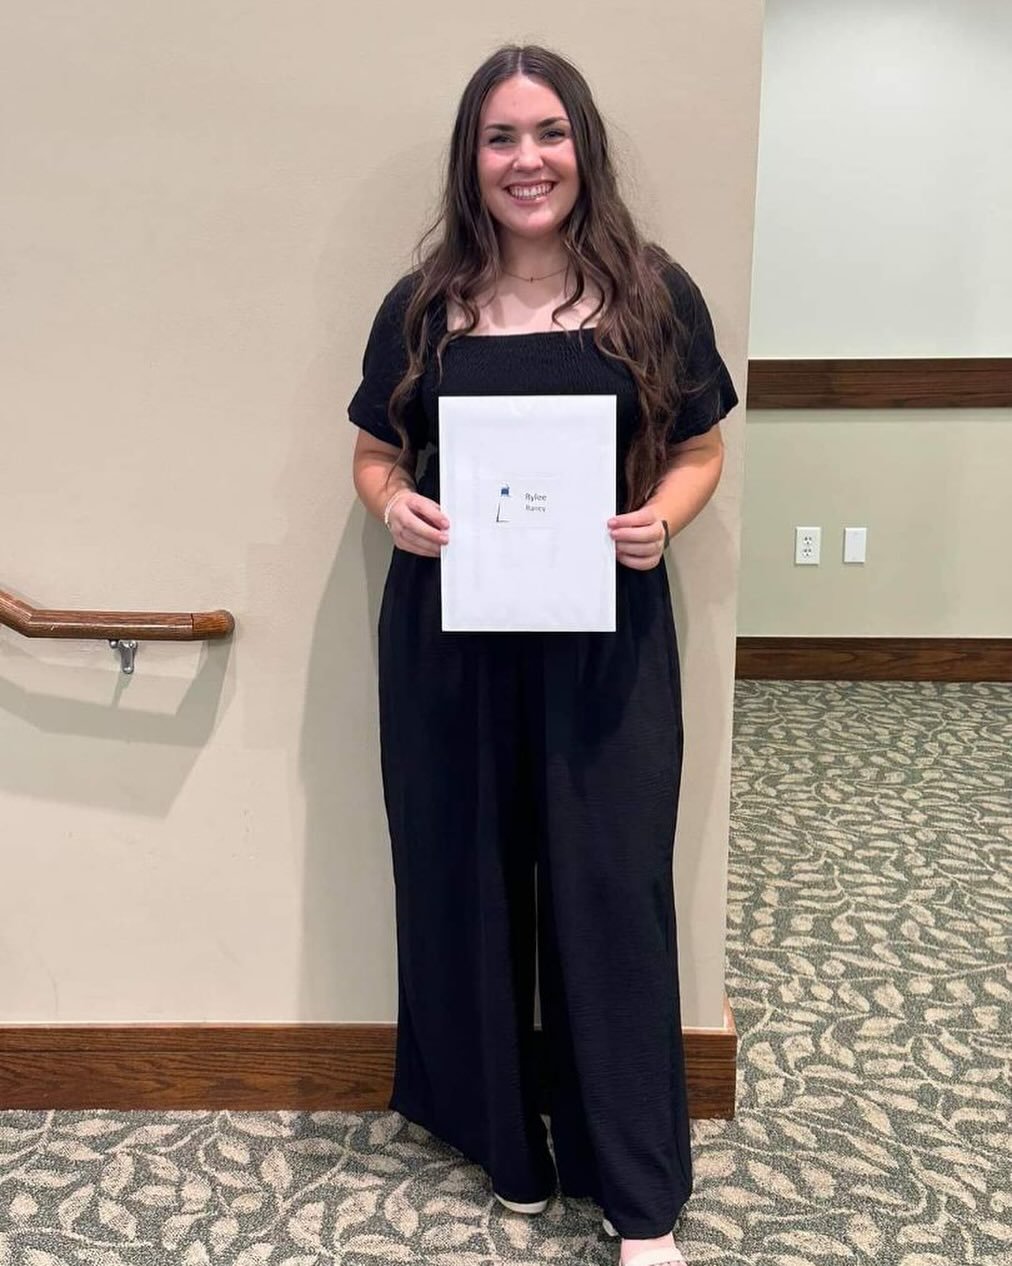 Hooray for our very own @rylee.raney! ❤️

Every year, the Moral Courage Foundation awards a Moral Courage Scholarship to one or more college-bound seniors who meet the scholarship eligibility requirements.

This year, one of our employees, Rylee Rane